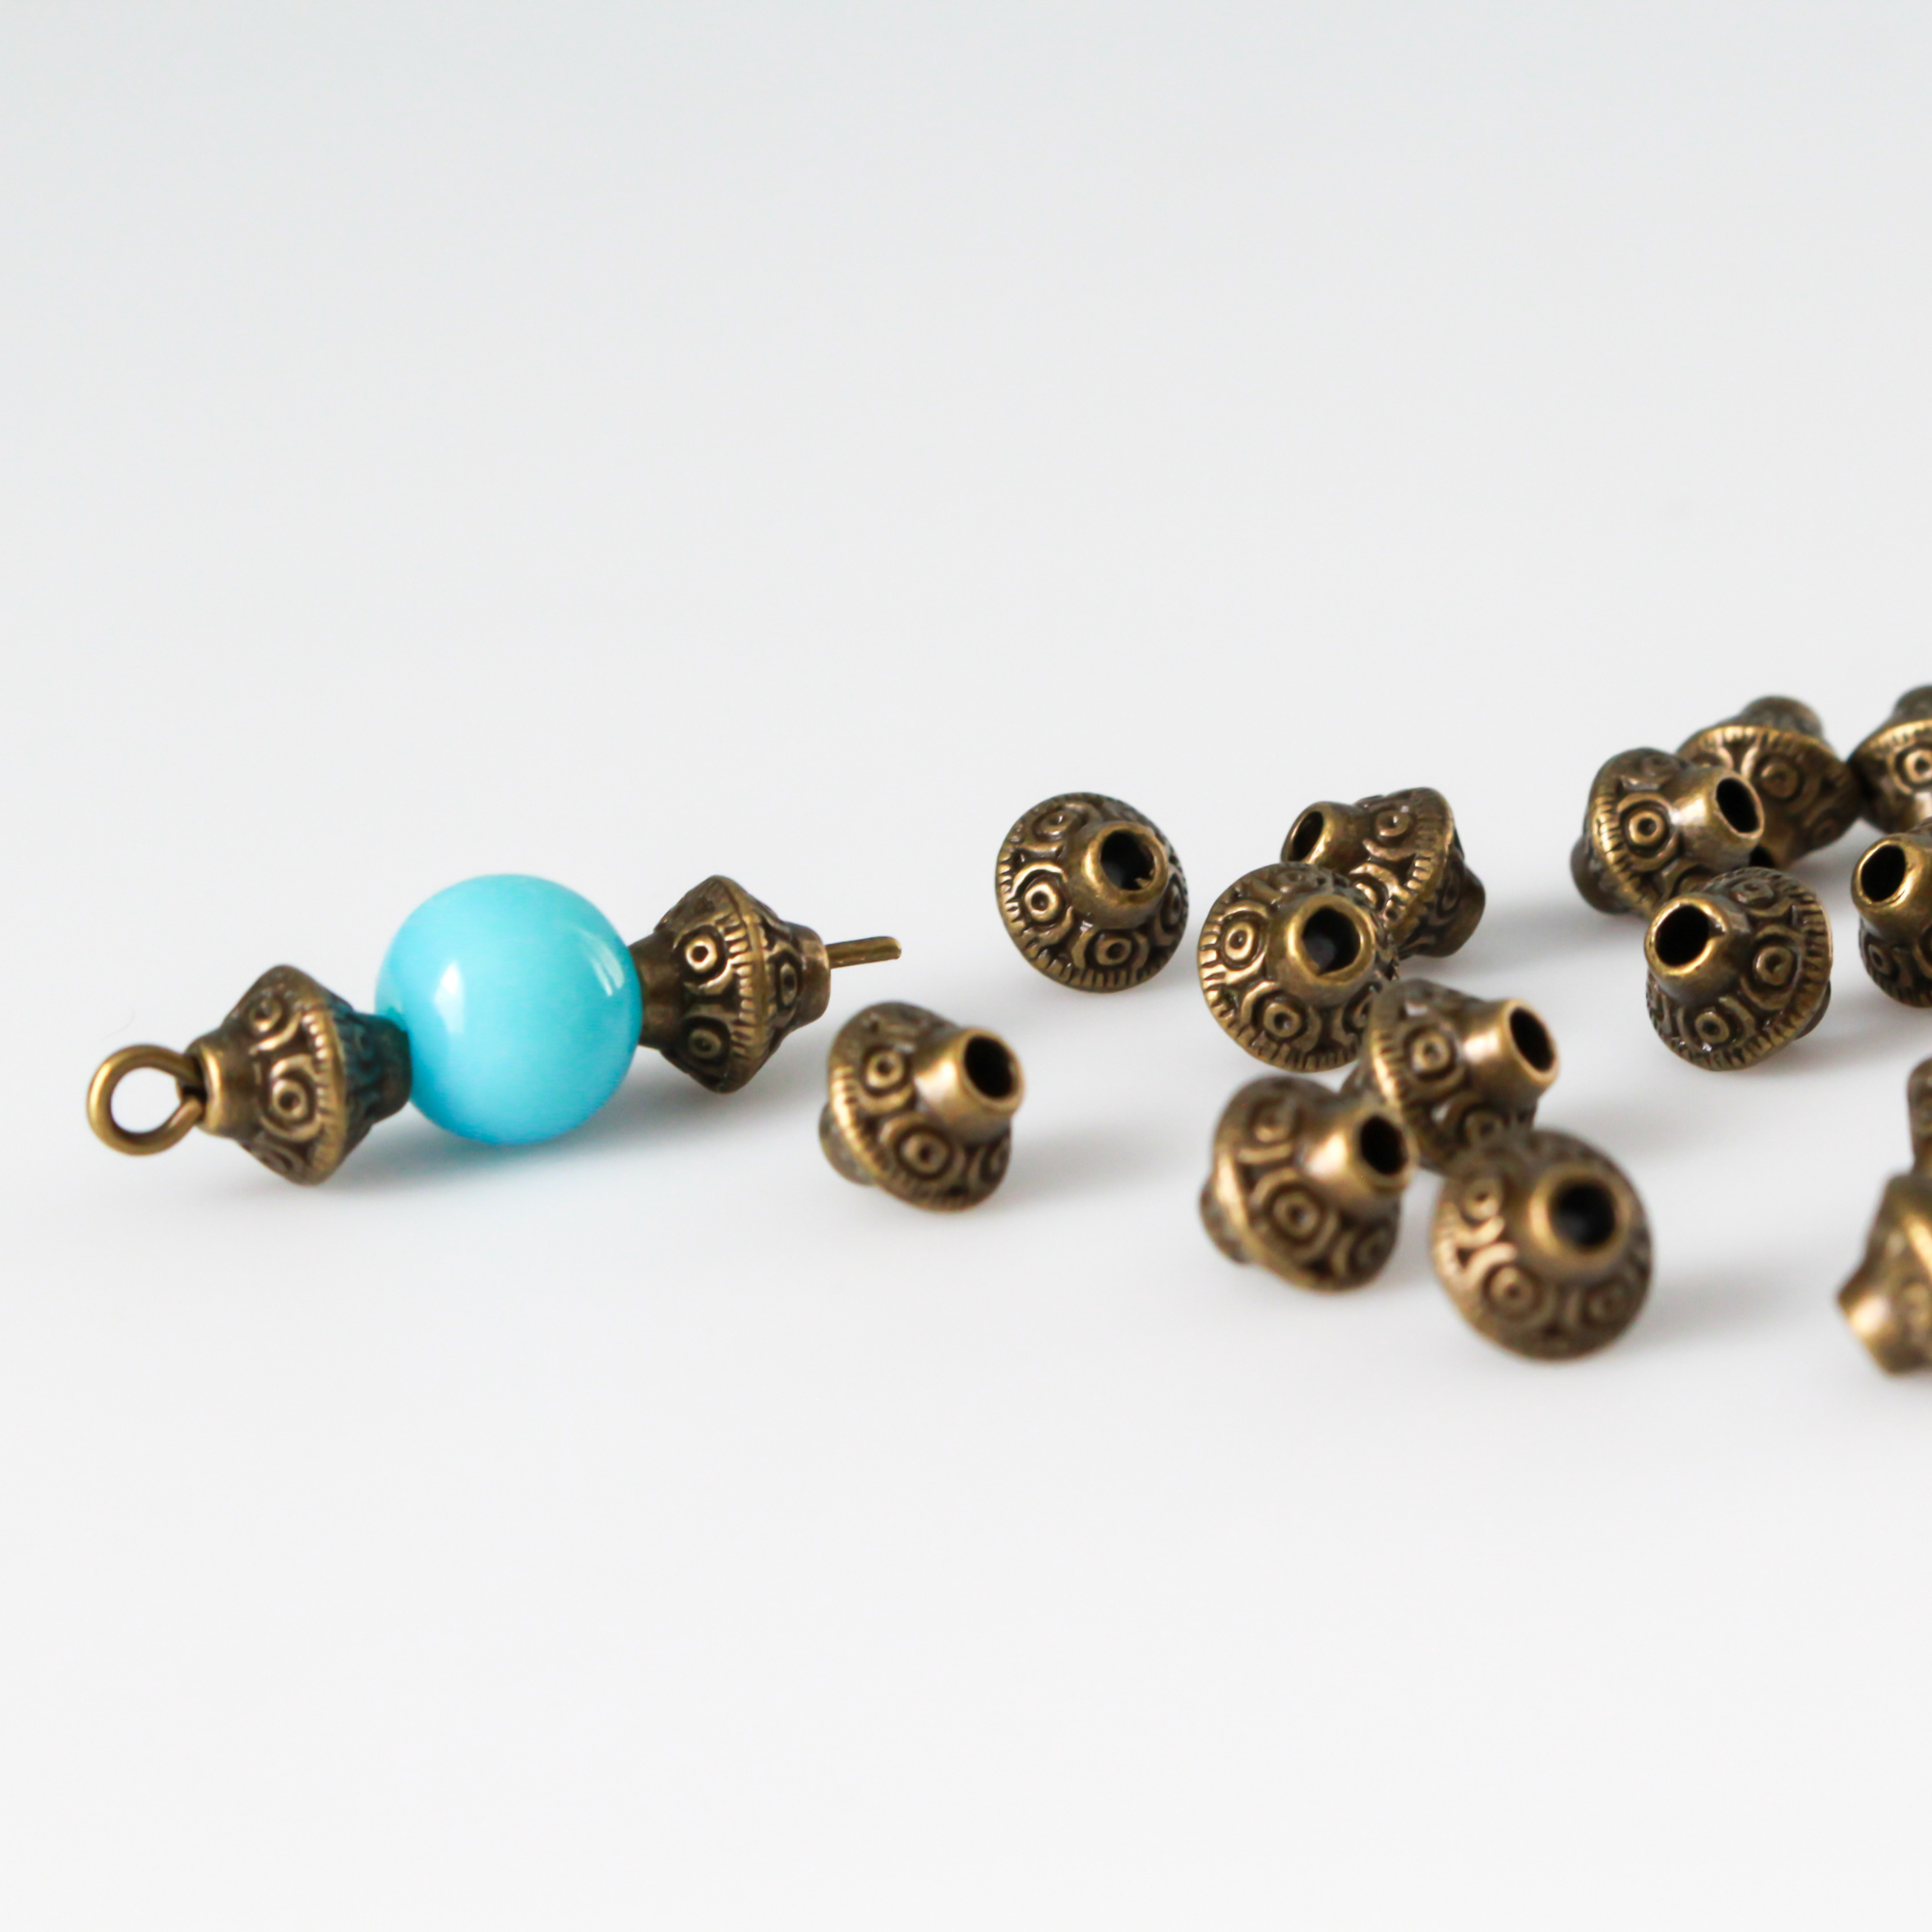 50 metal bicone shaped spacer beads with an antiqued bronze finish and a swirl pattern, 6mm x 6mm